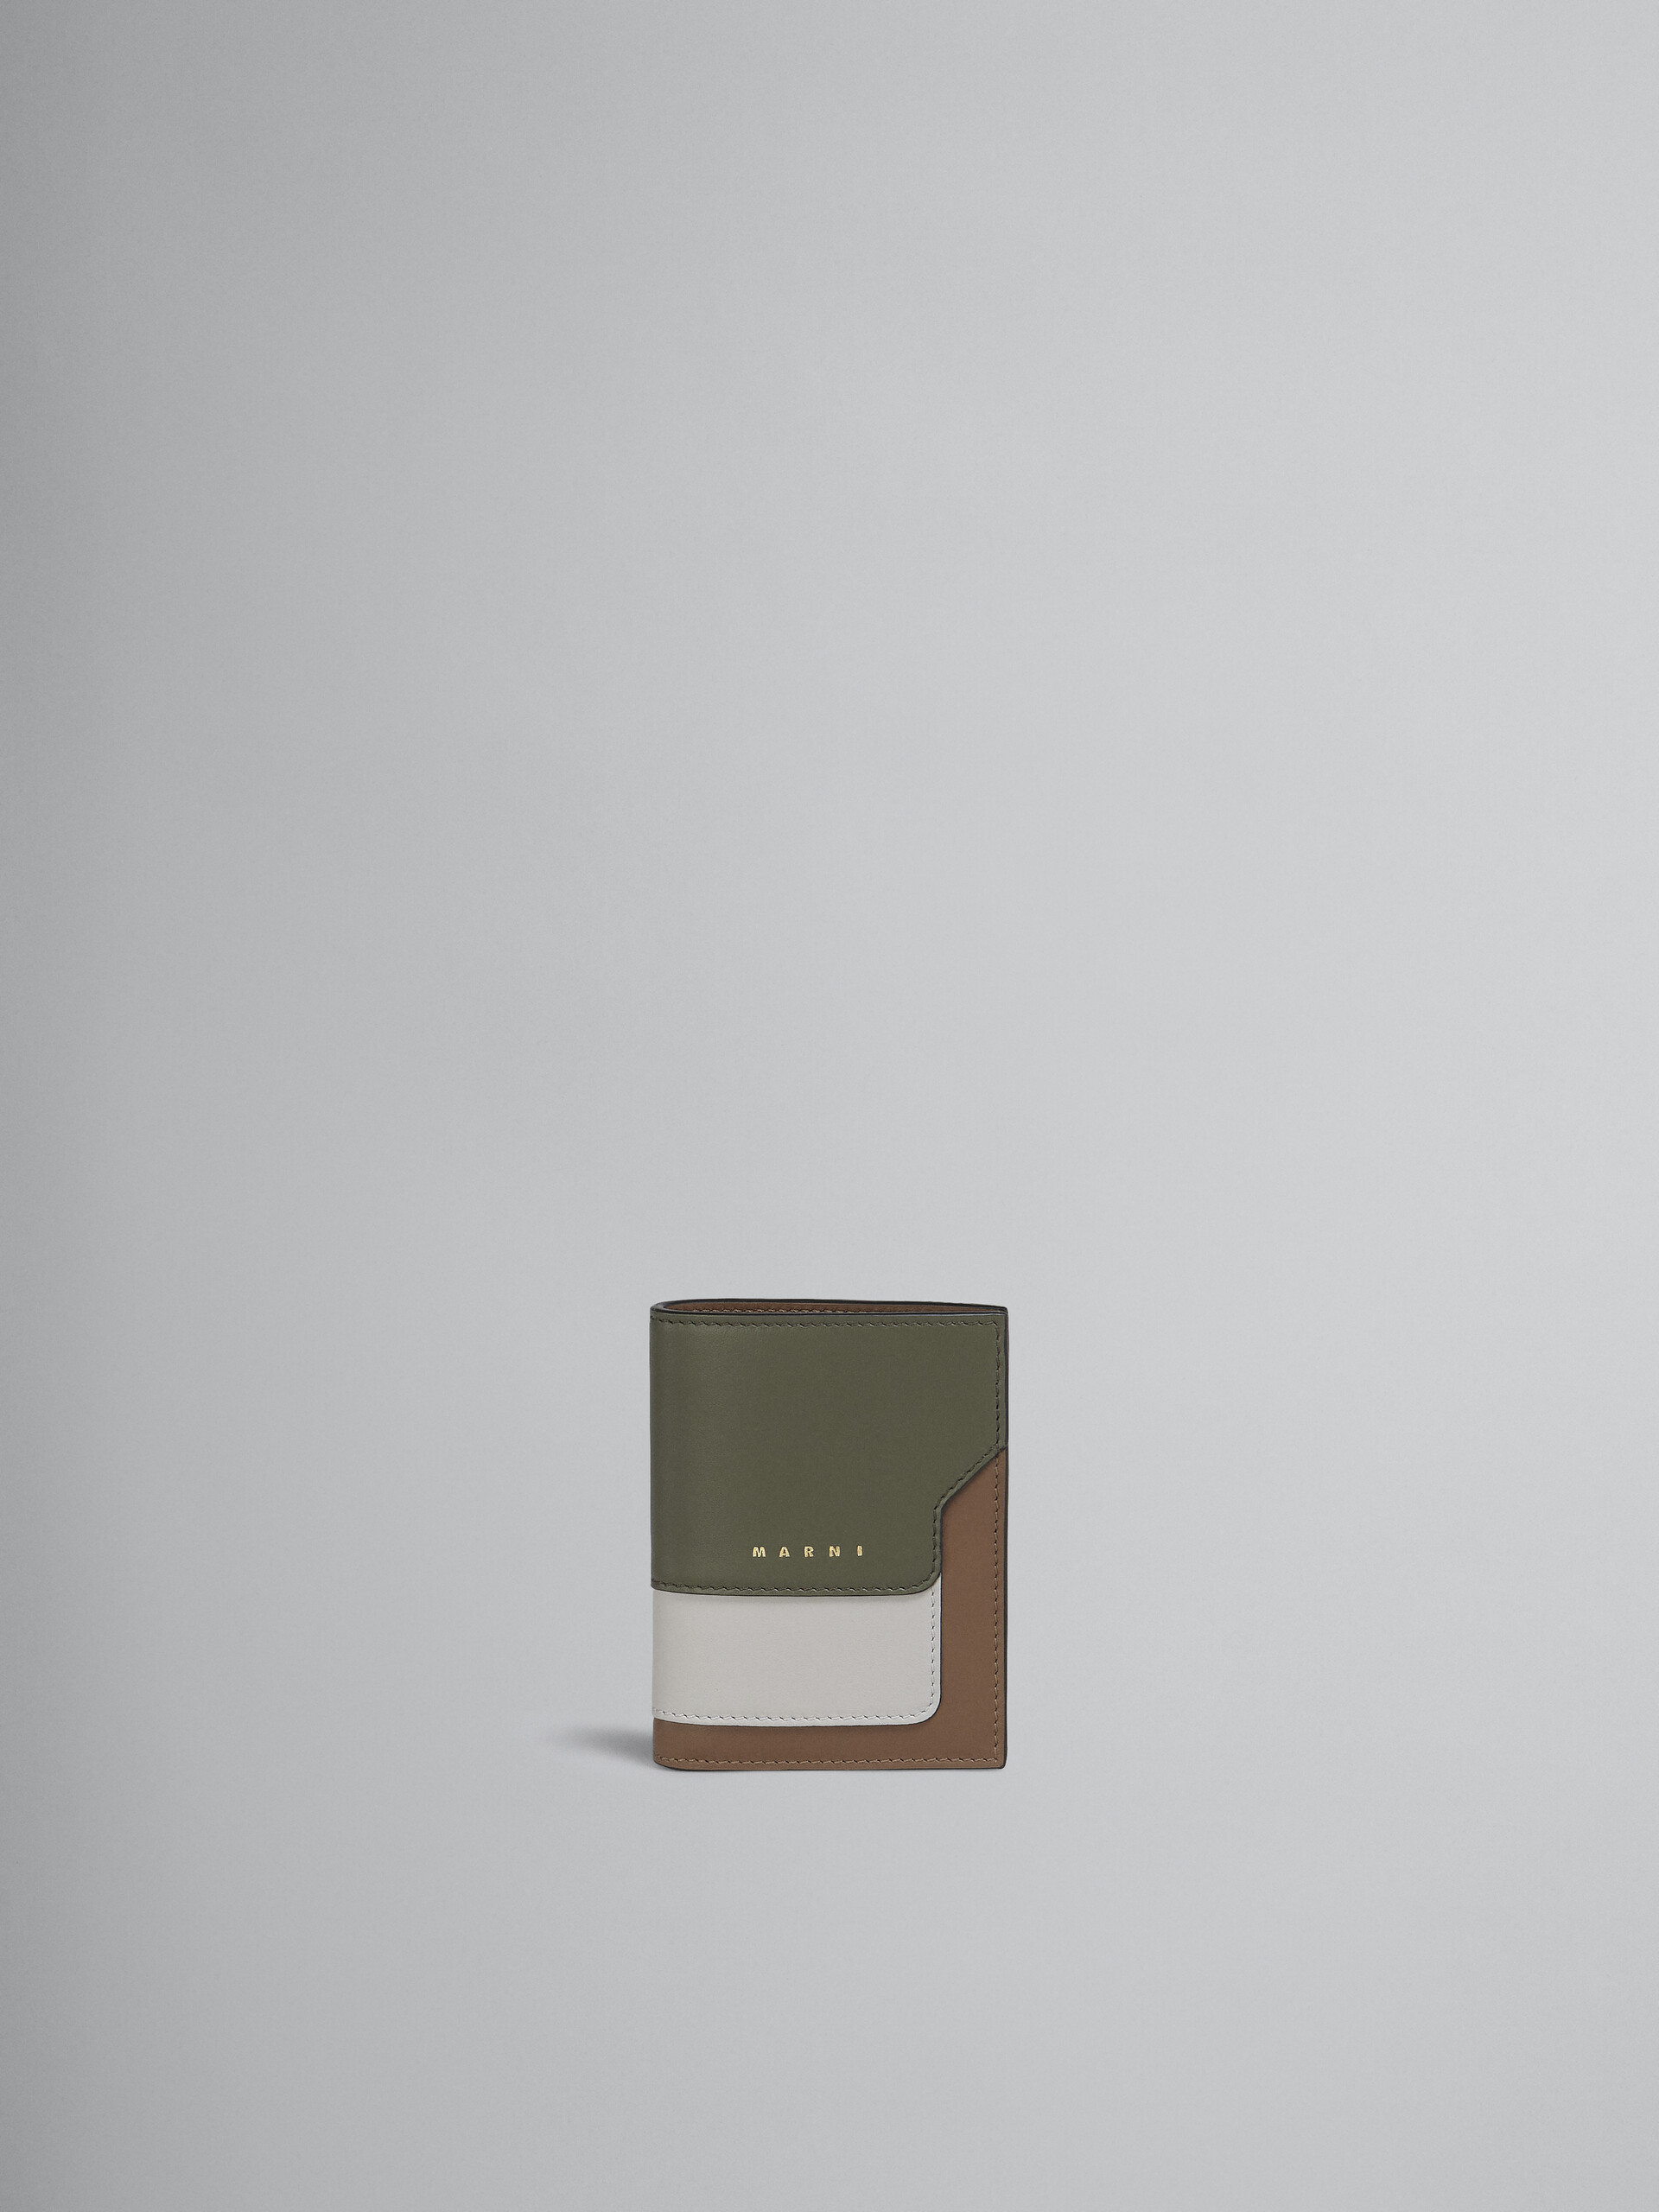 Green grey and brown leather bi-fold wallet - Wallets - Image 1